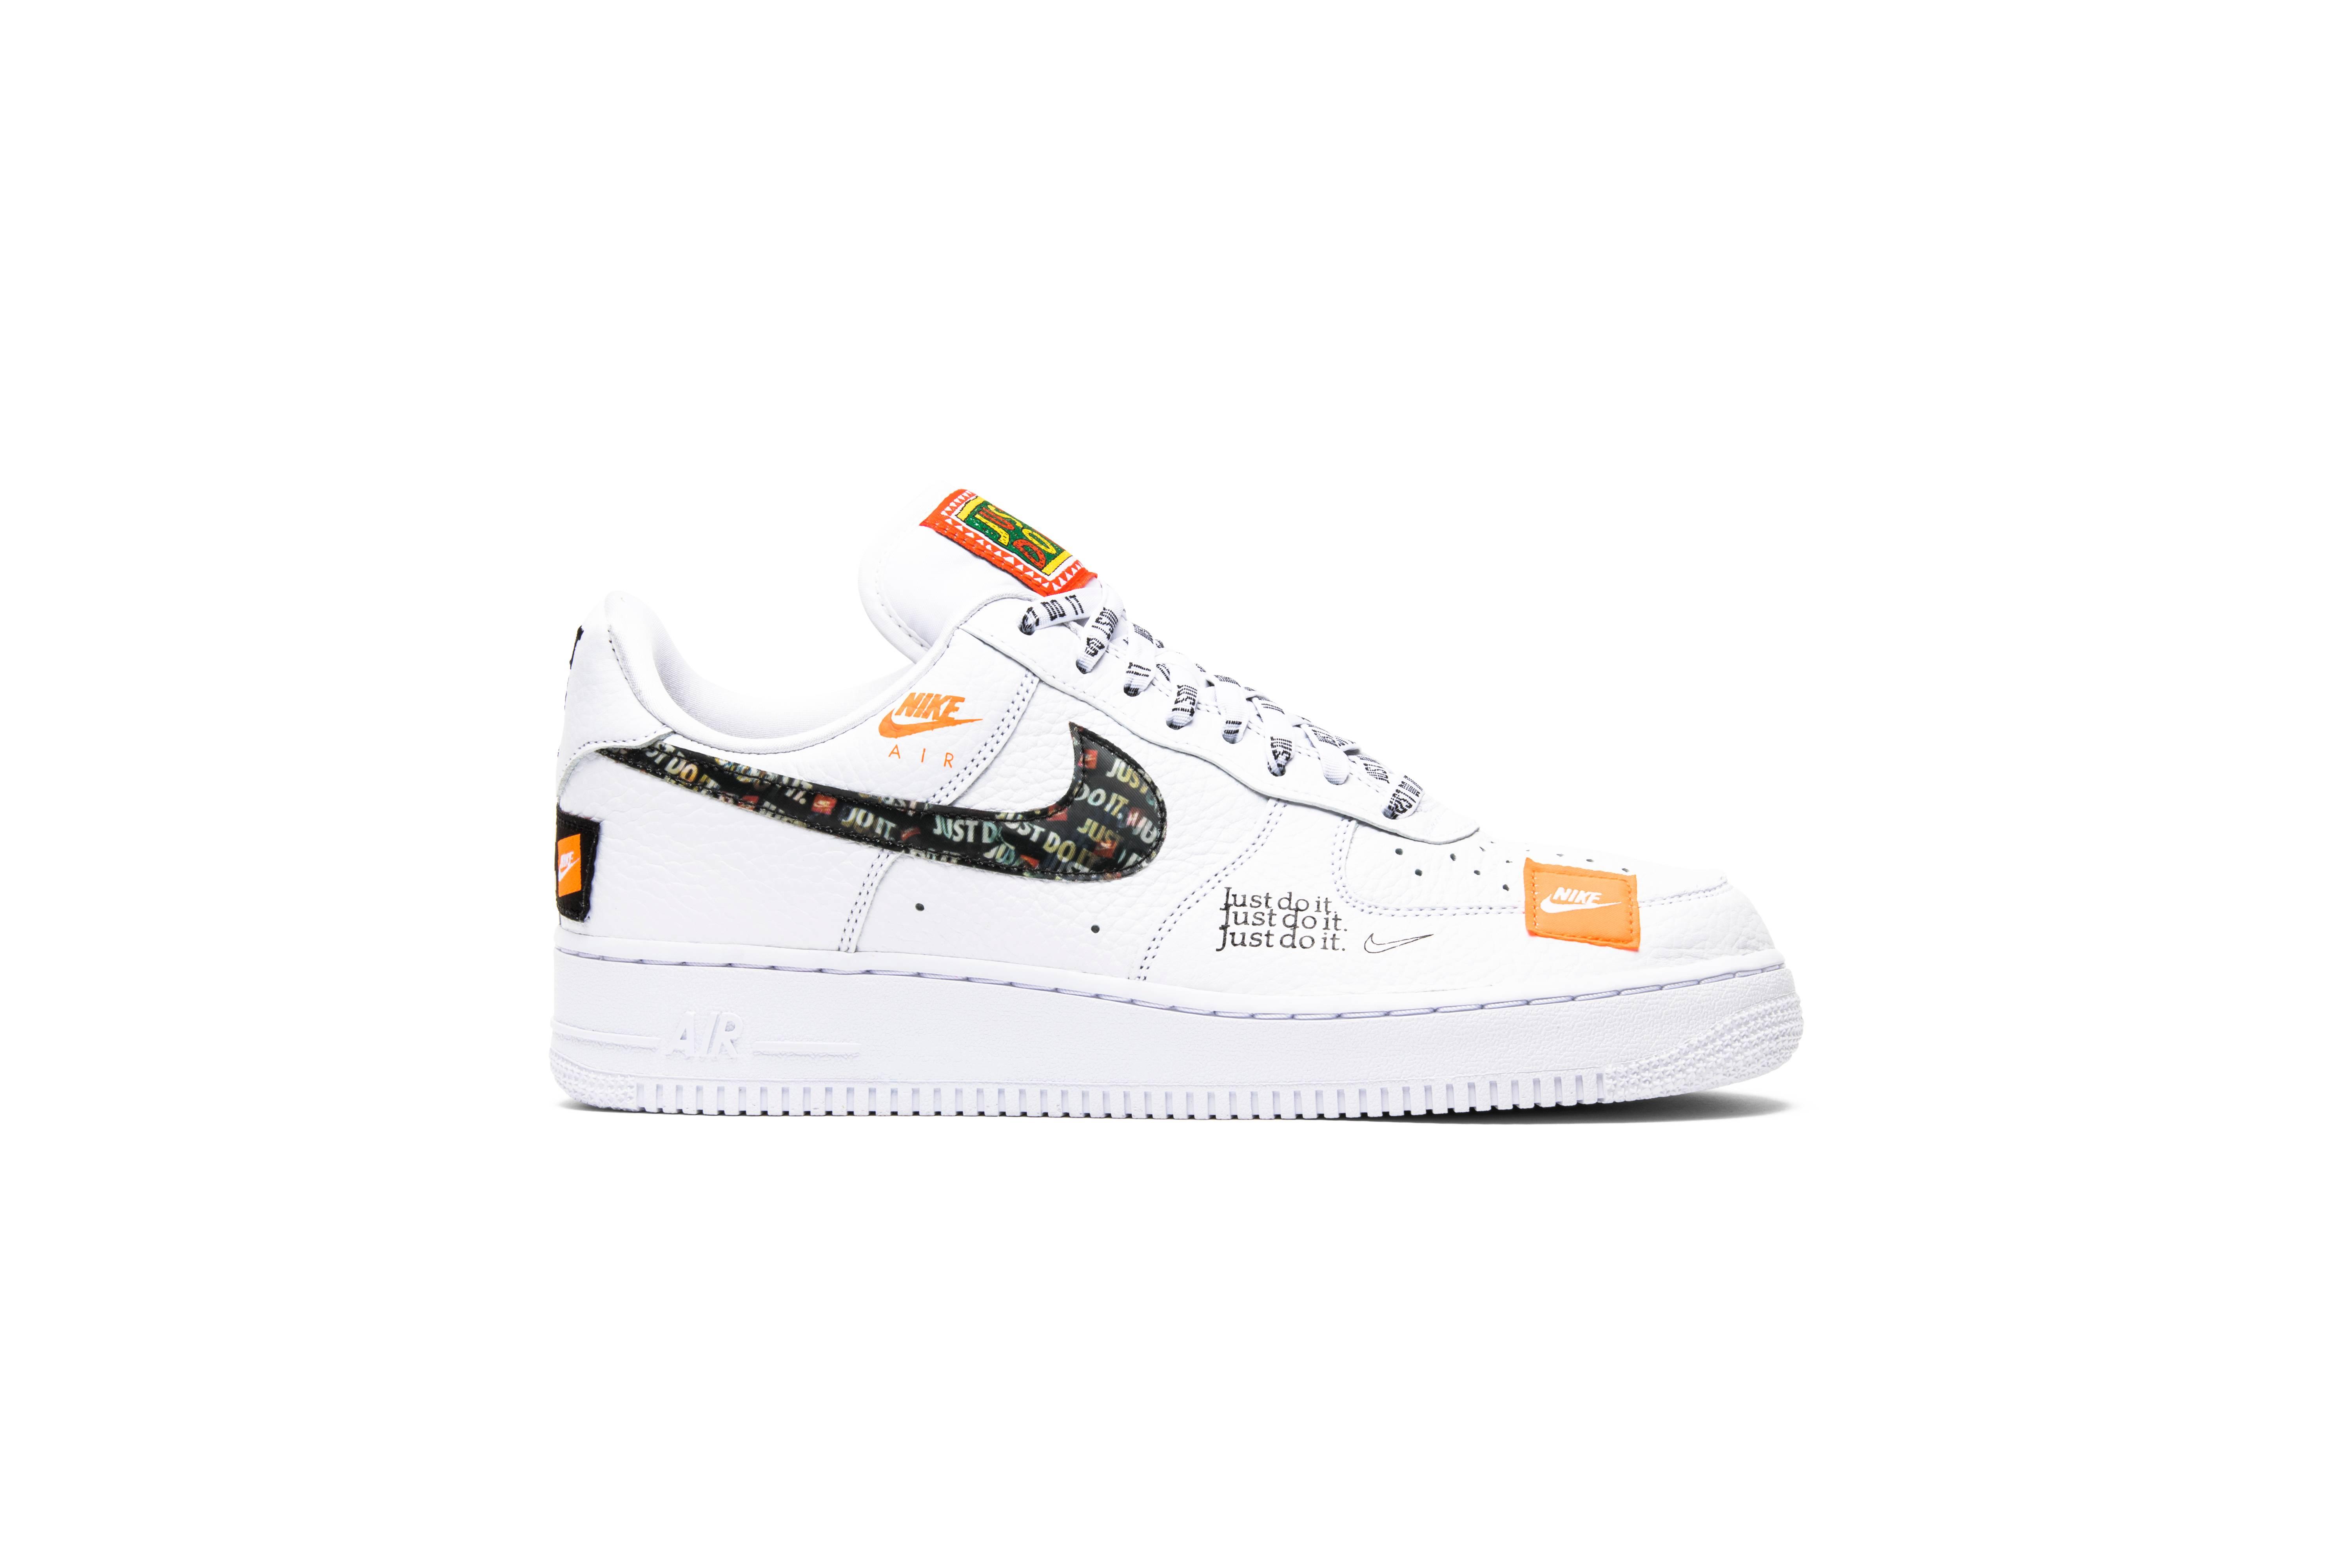 Nike Air Force 1 07 Prm Jdi Shoes - Size 13 in White/Black (White) for Men  - Save 78% - Lyst